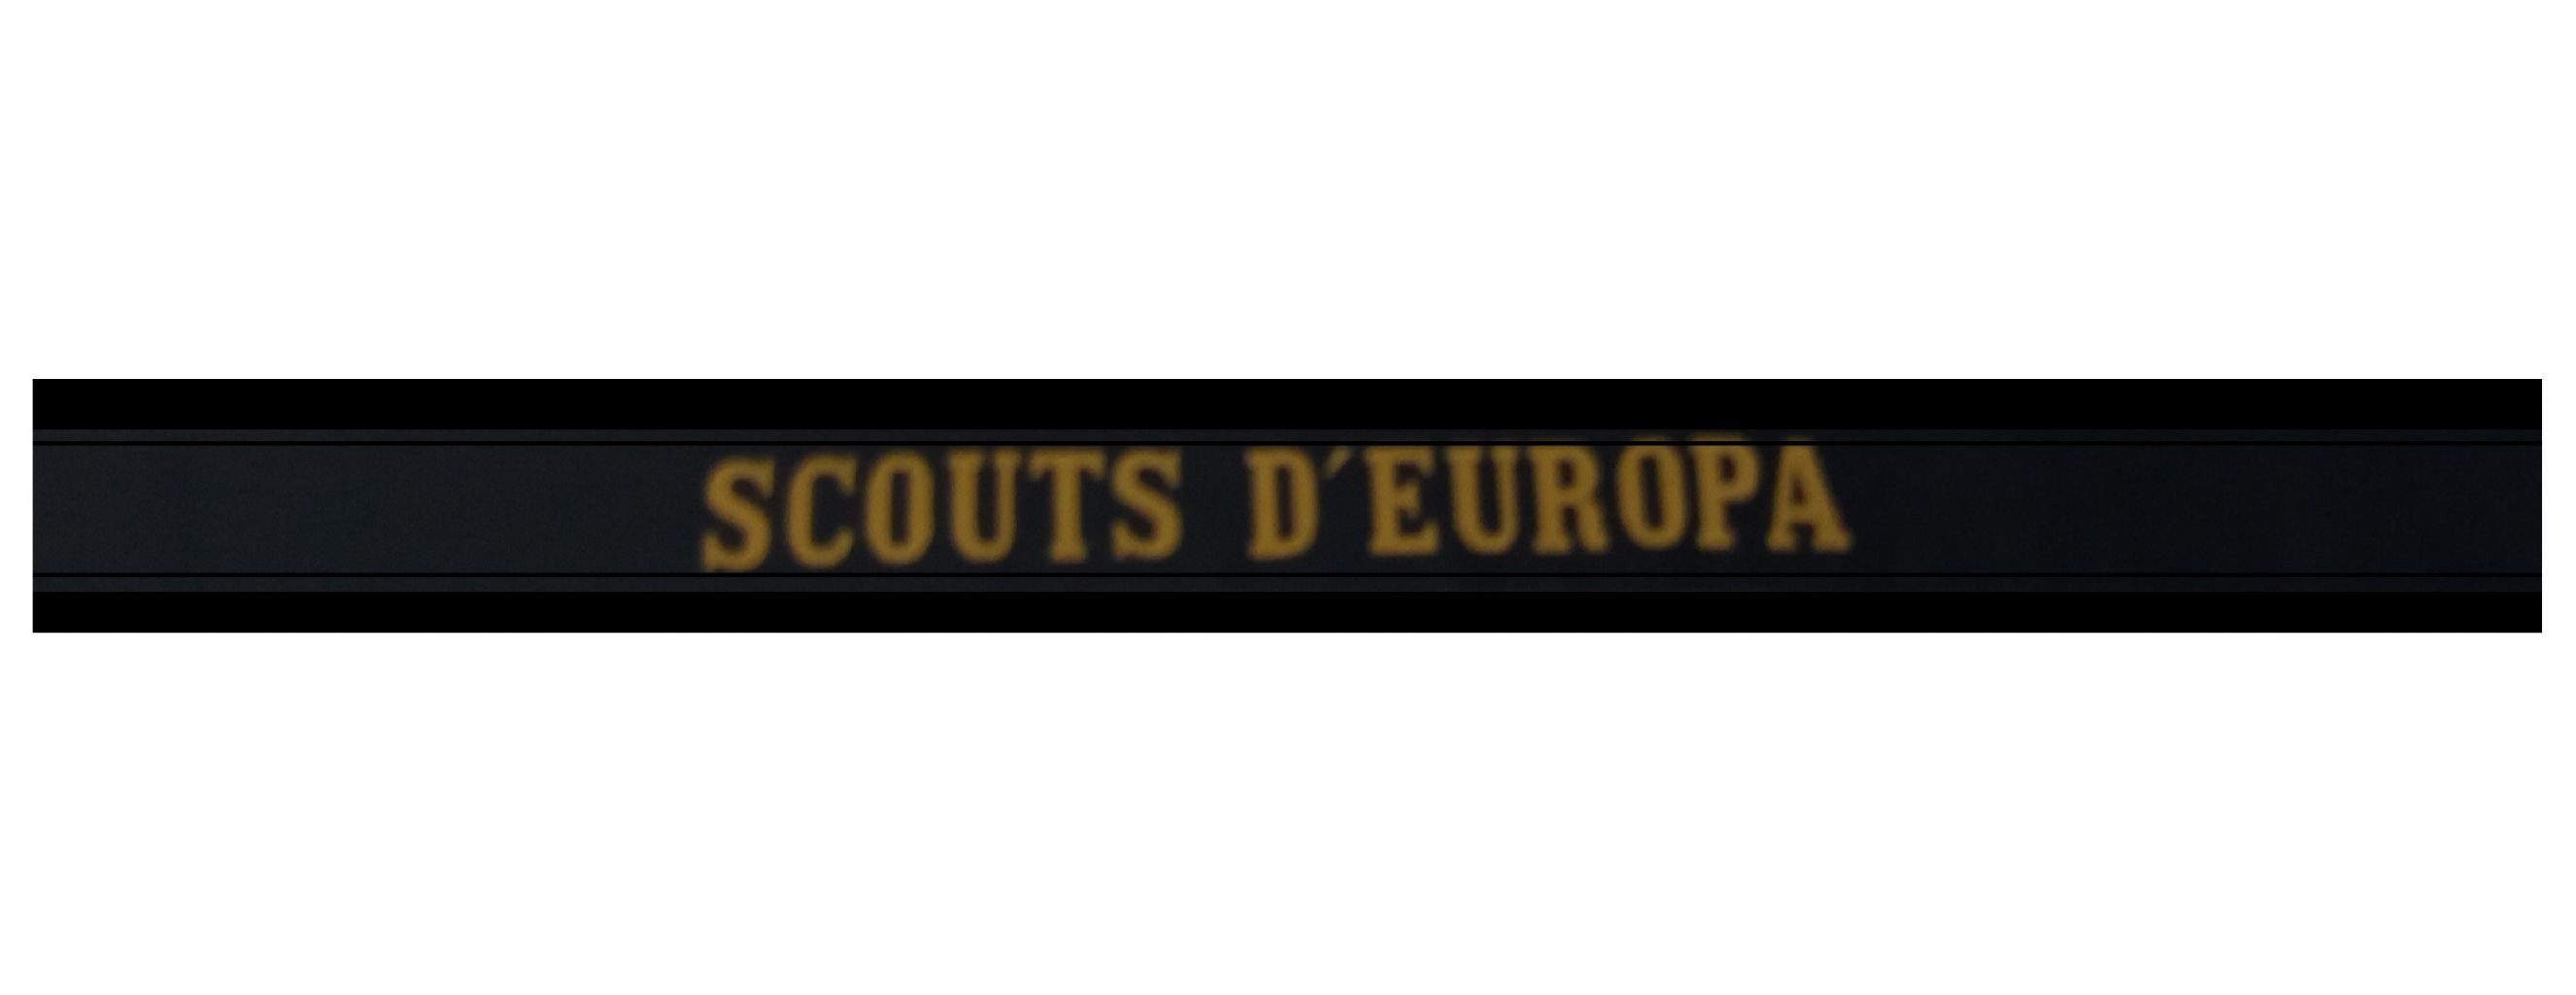 NAUTICAL SCOUTS OF EUROPE